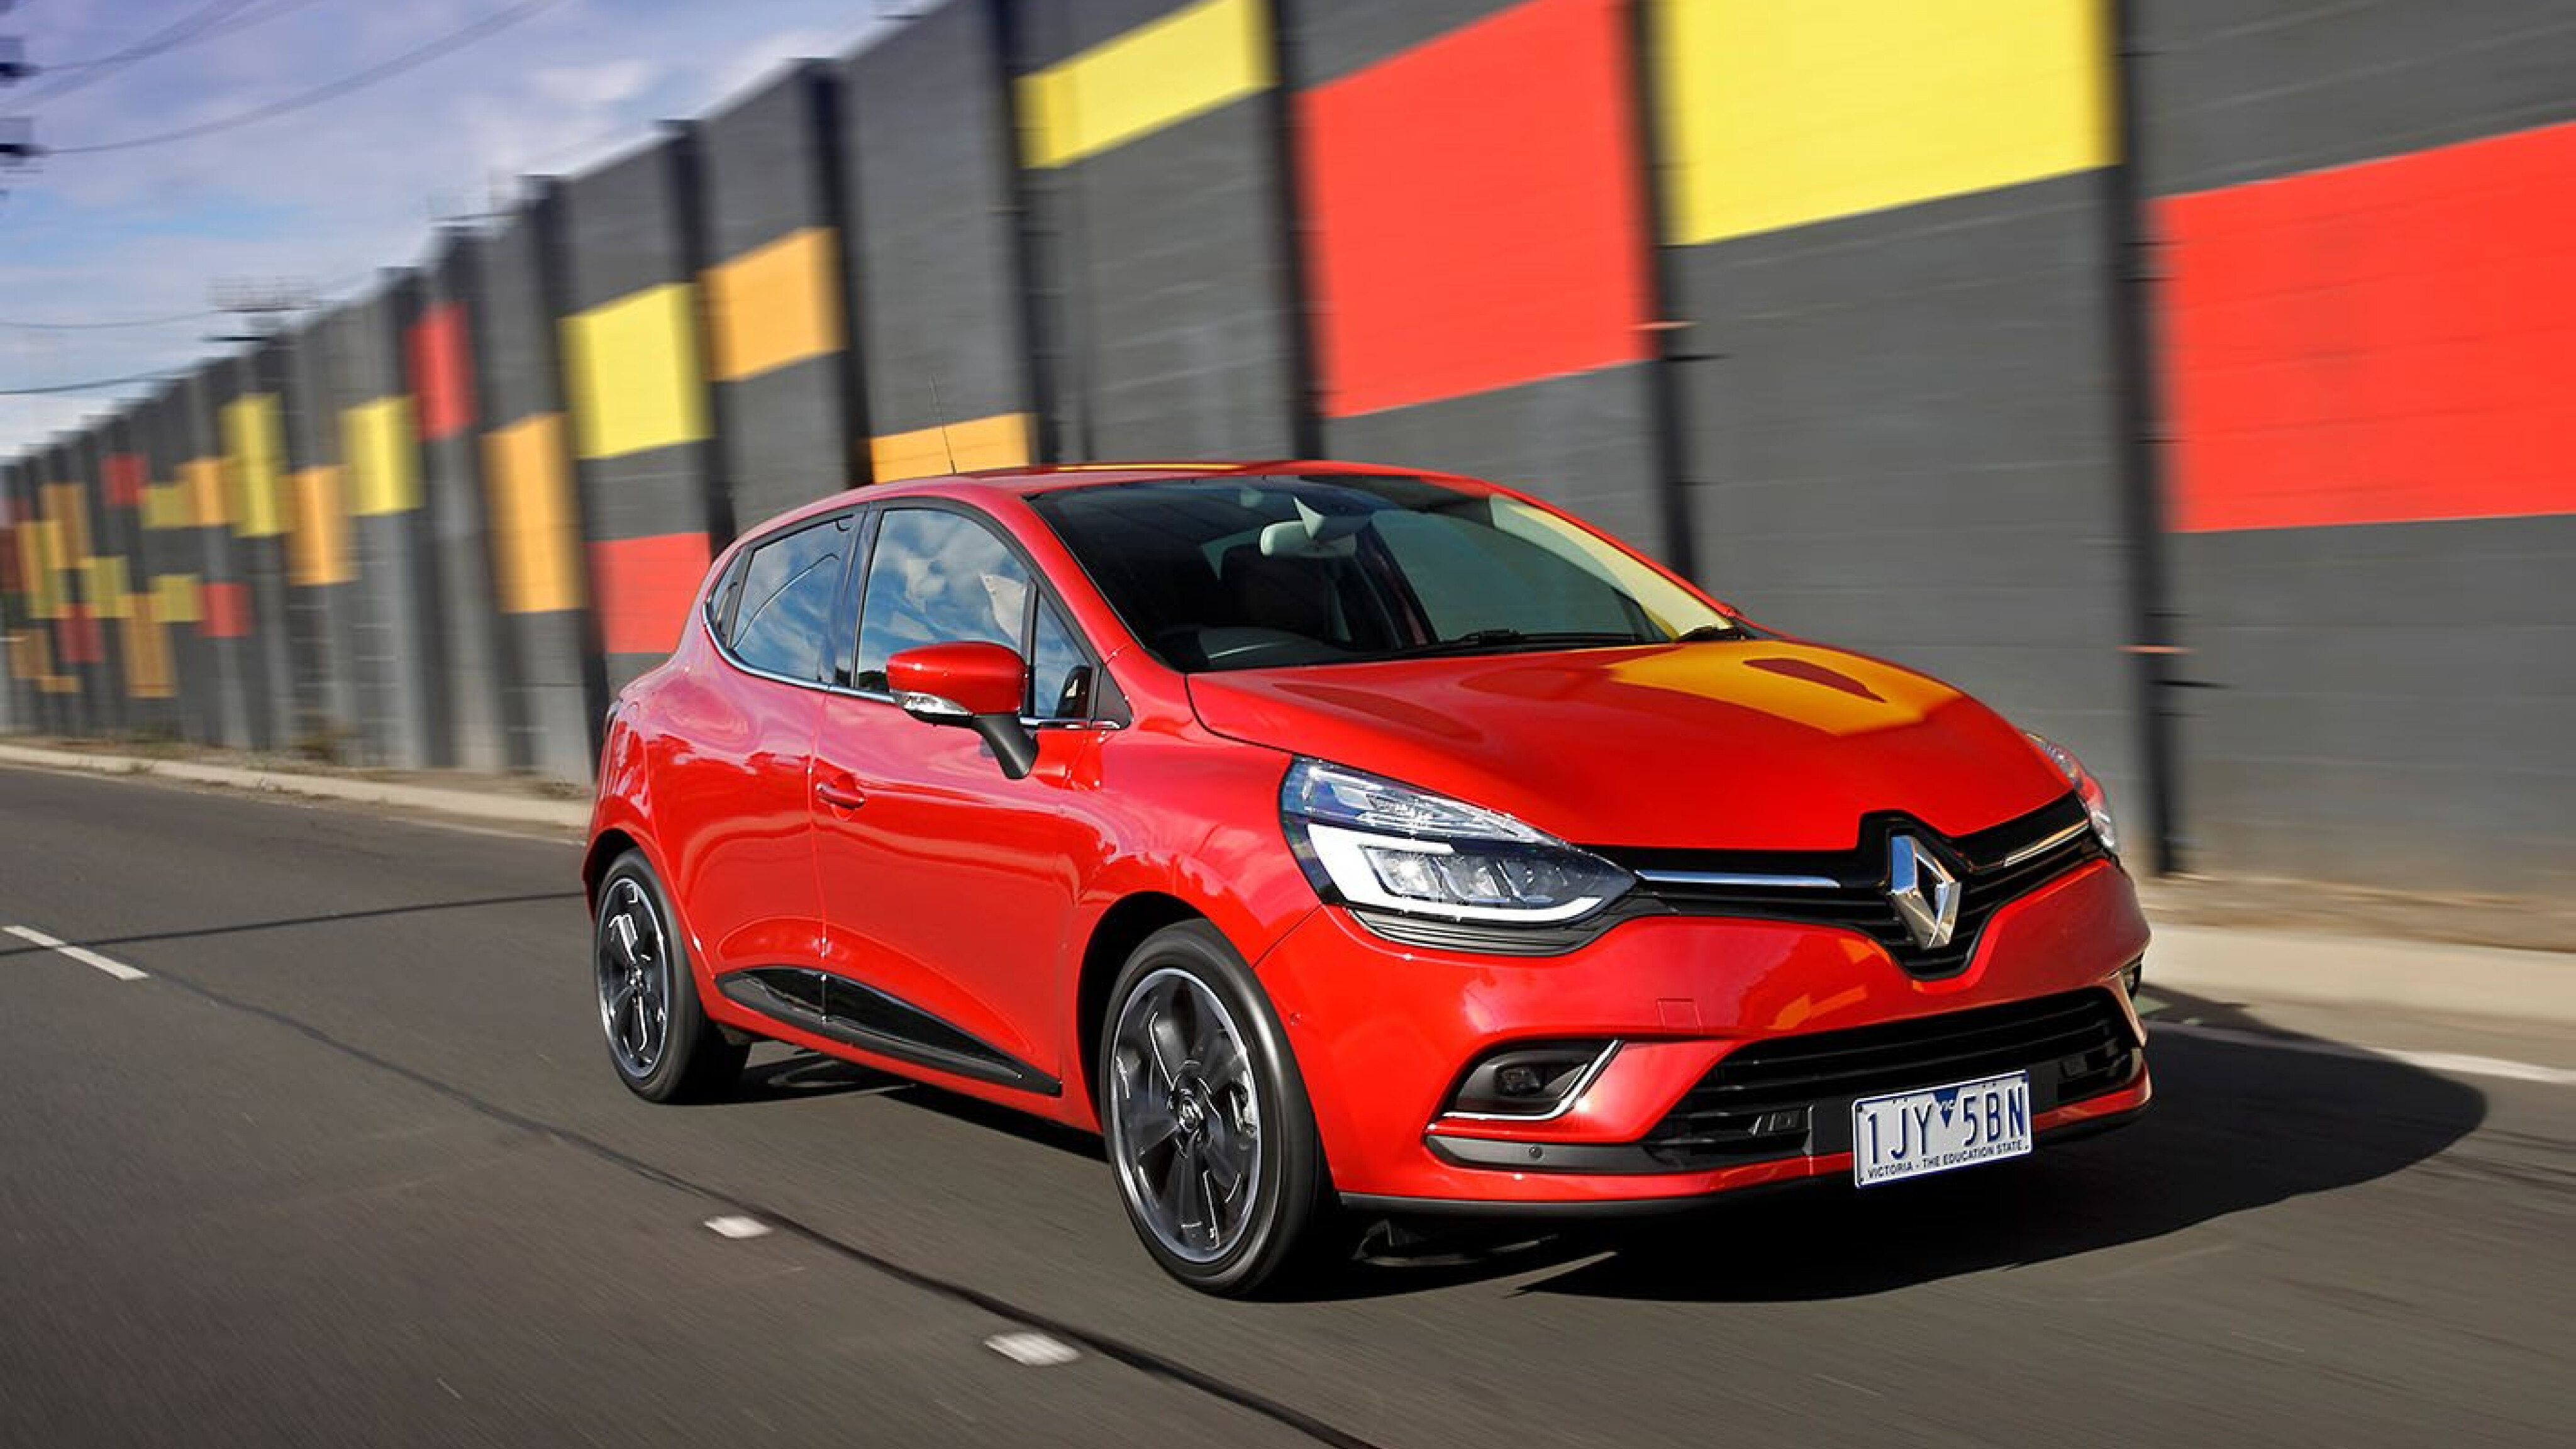 Renault Clio Review, Price & Features